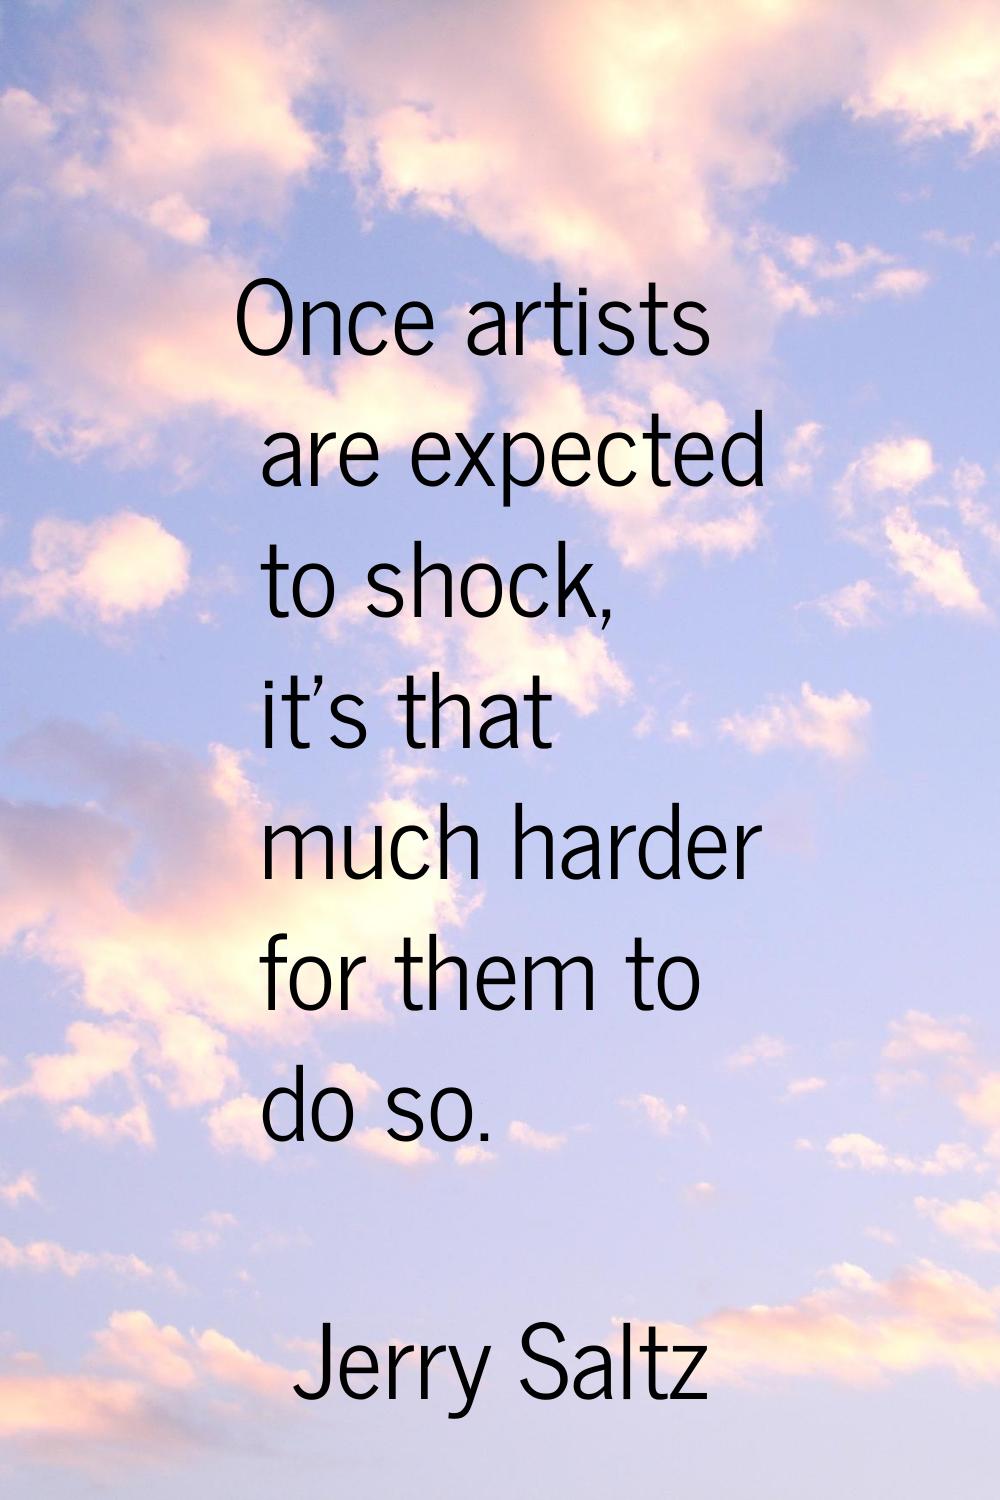 Once artists are expected to shock, it's that much harder for them to do so.